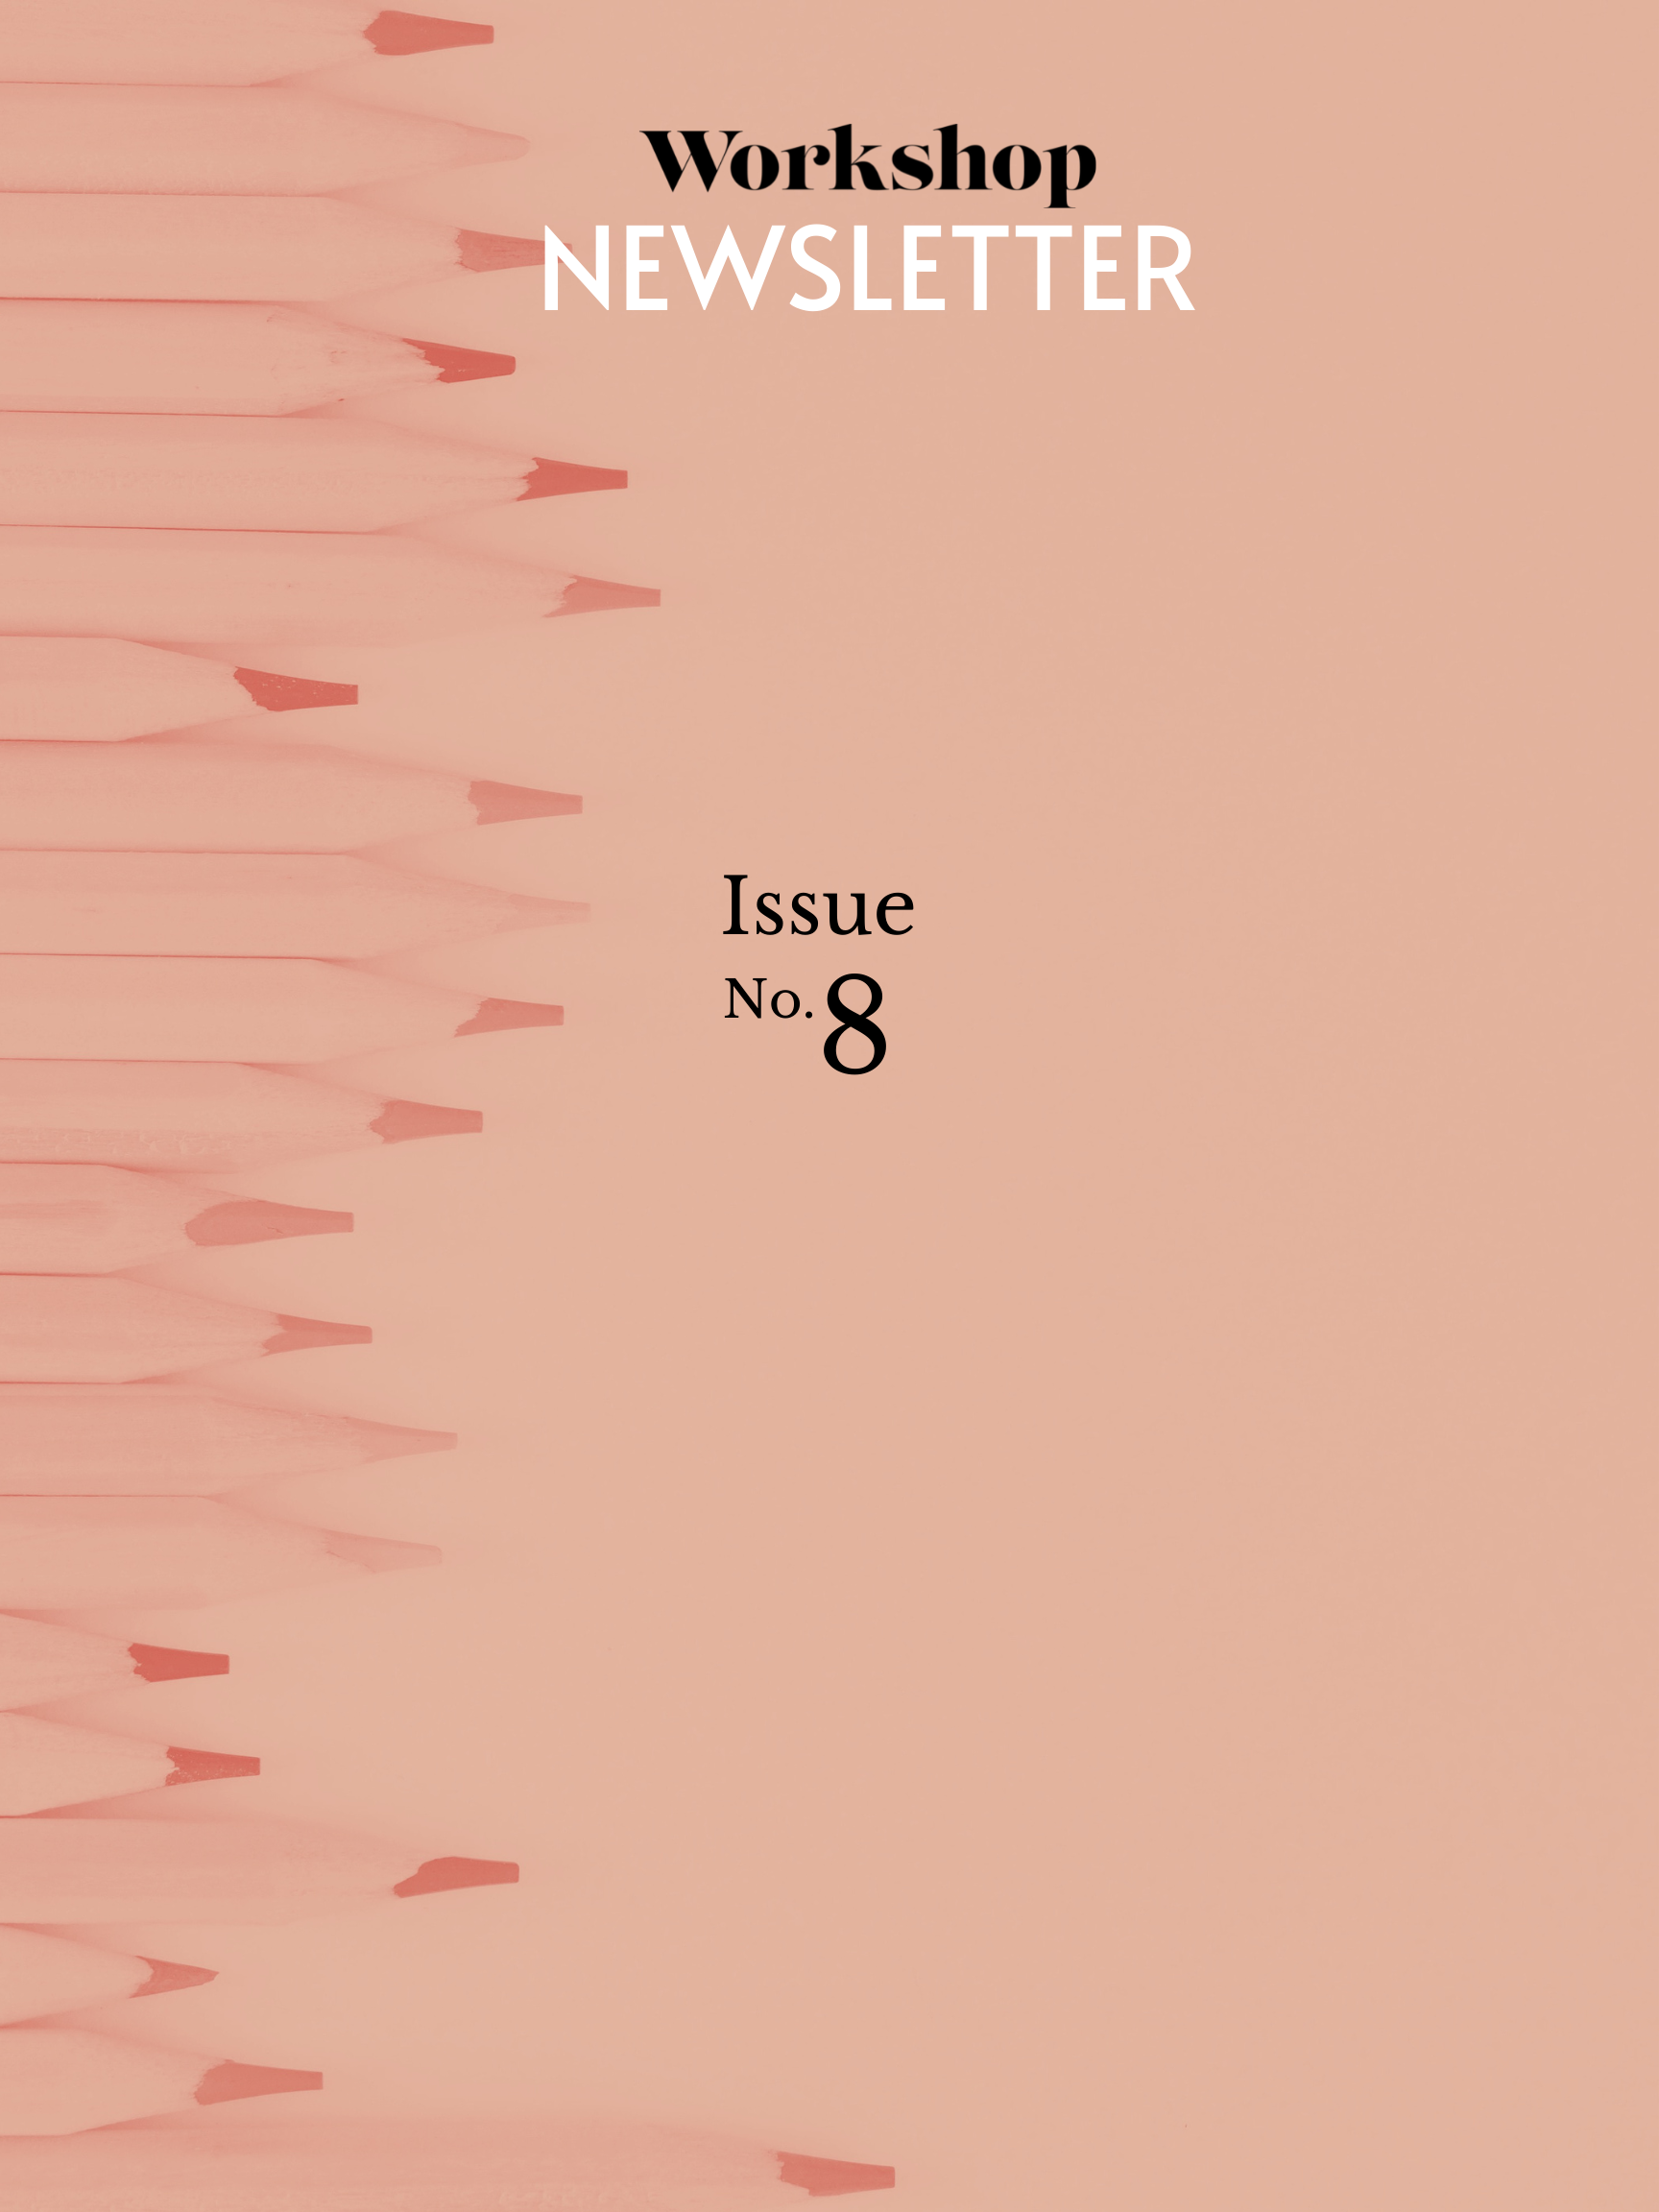 A salmon-coloured overlay on a photo of pencils, with the words "Workshop newsletter issue No. 8".